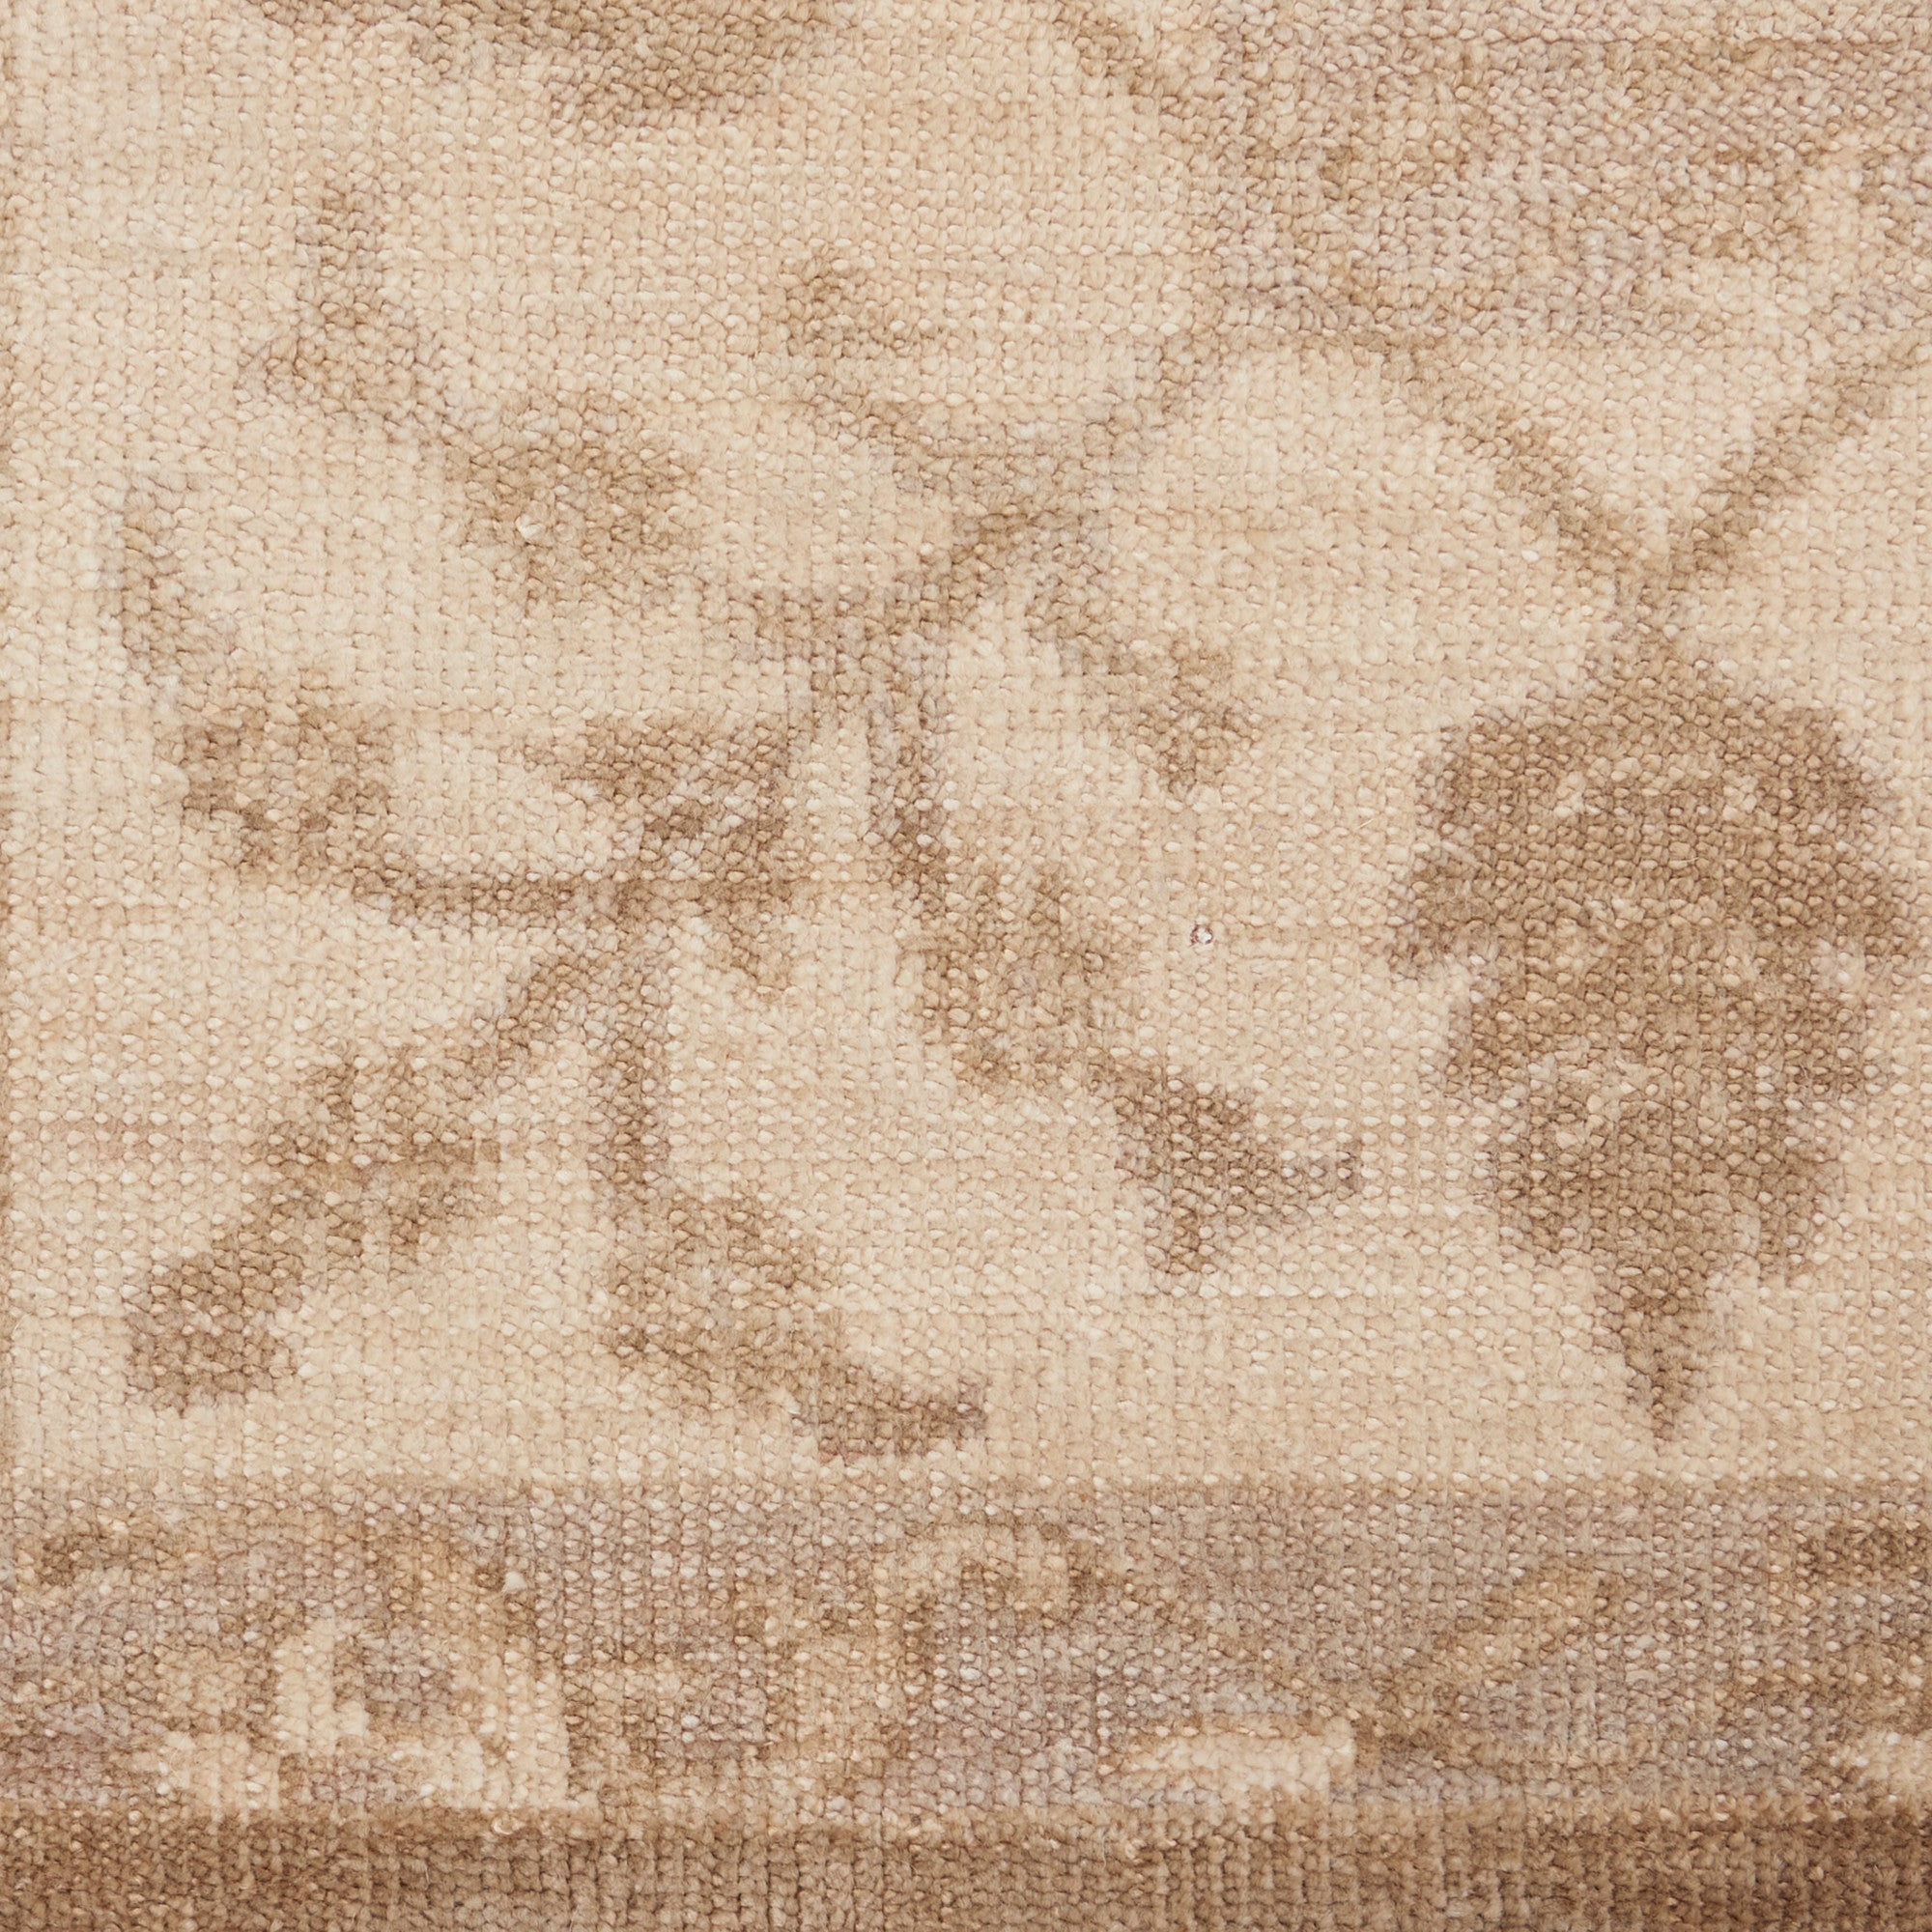 Close-up of a plush, neutral carpet with a floral design.